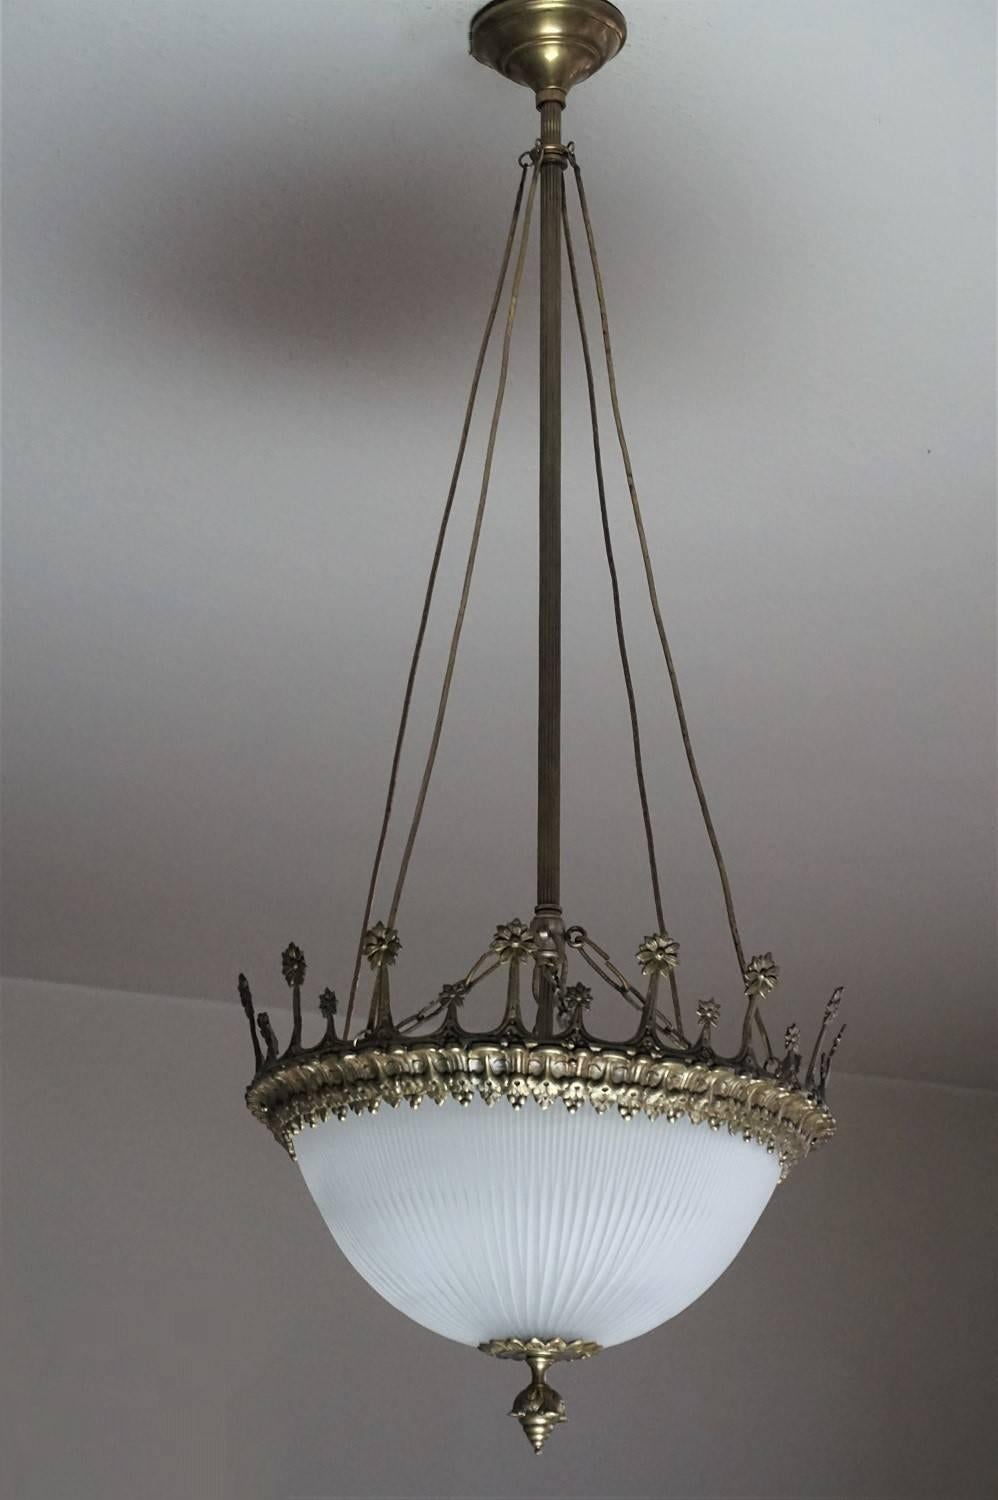 Spanish Art Deco crown shaped patinated bronze and frosted cut-glass two-light chandelier/lantern with bronze hanging four branch, circa 1920 - 1930

Two large bulb sockets 
Measures:
Height: 41 in (104 cm)
Diameter: 16.25 in (41 cm).

 